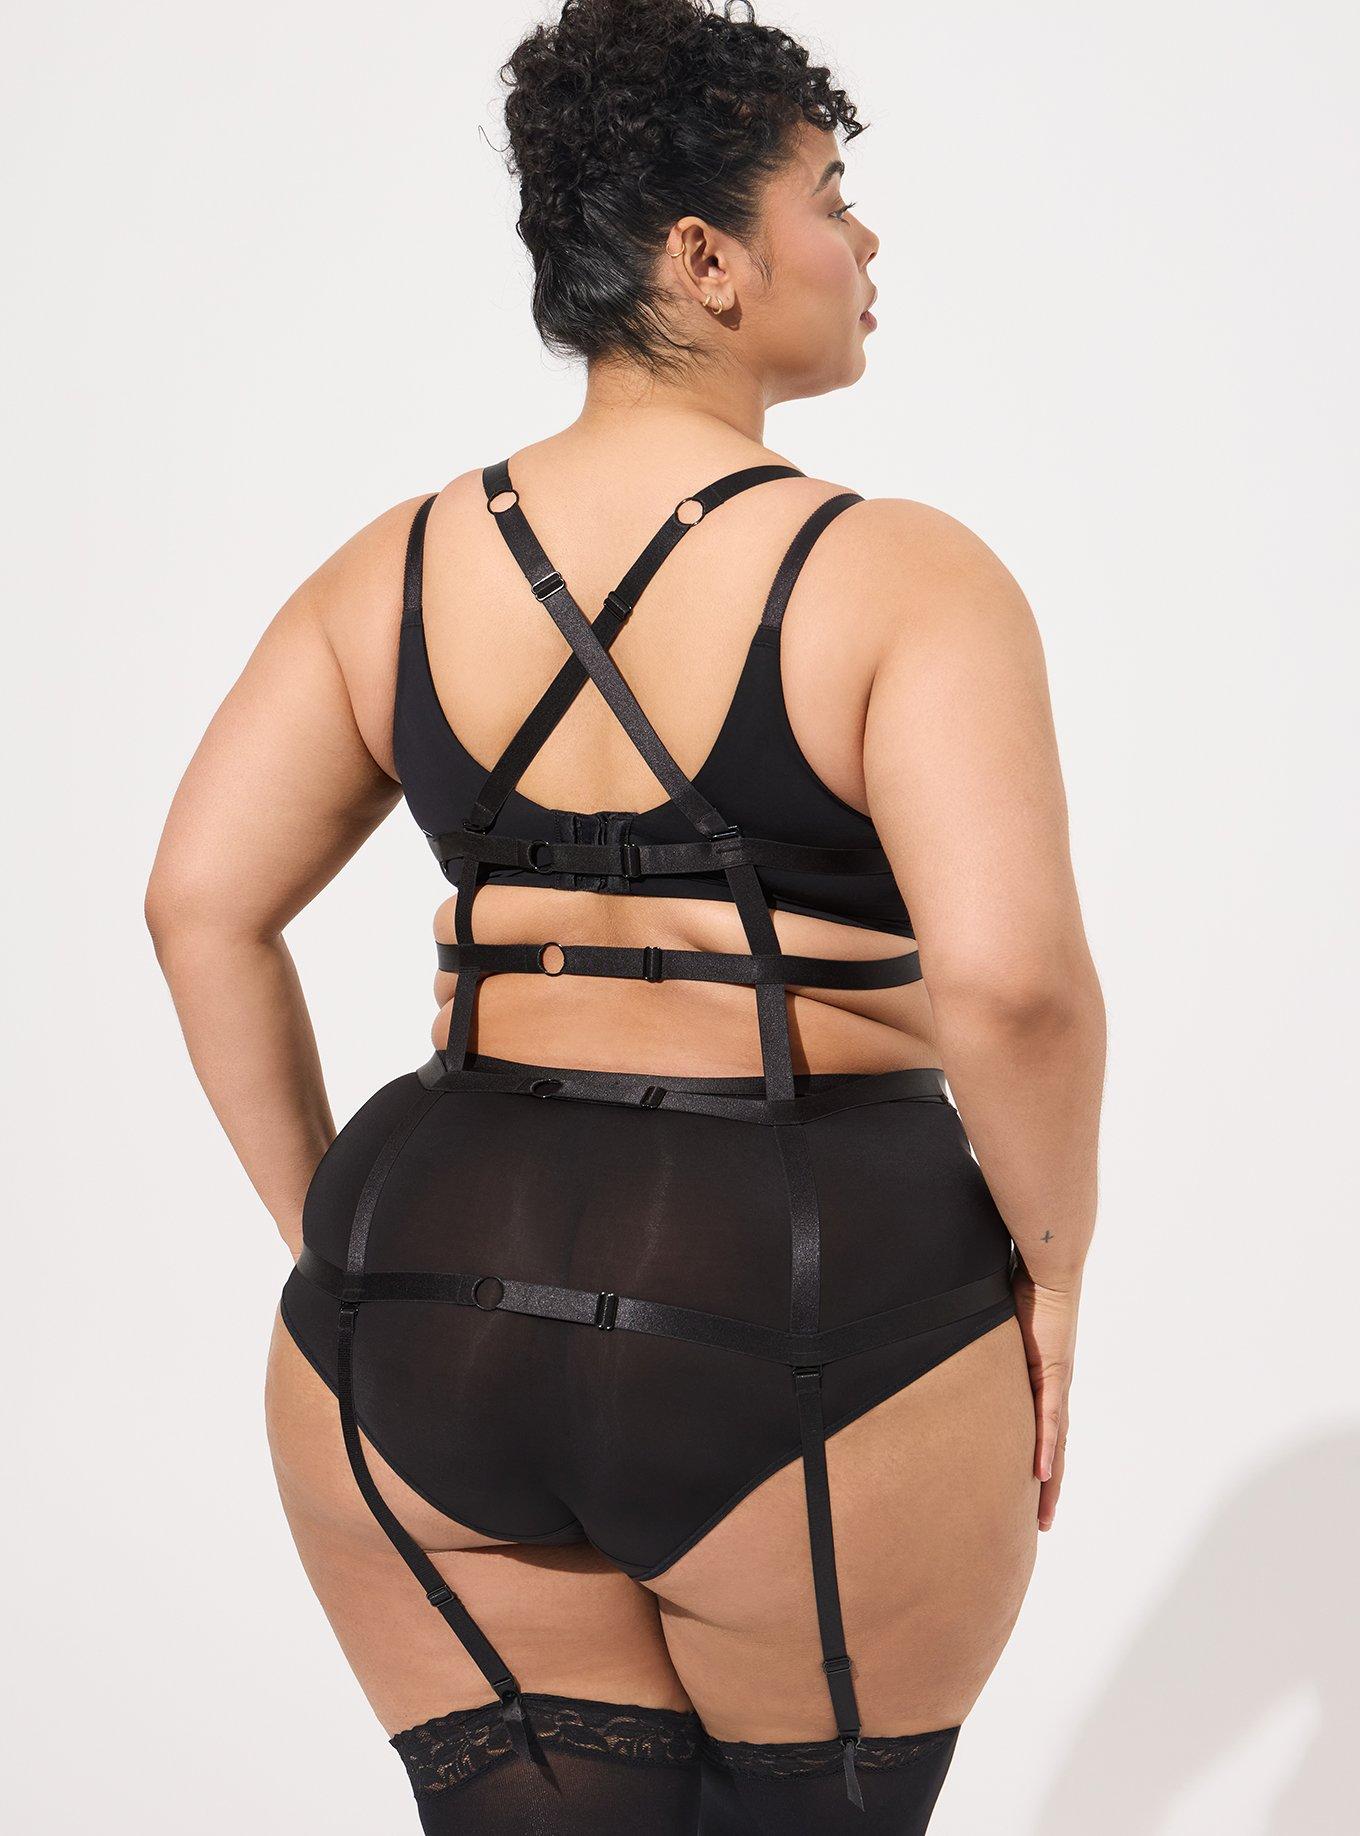 Plus Size - Strappy Harness With Garter - Torrid